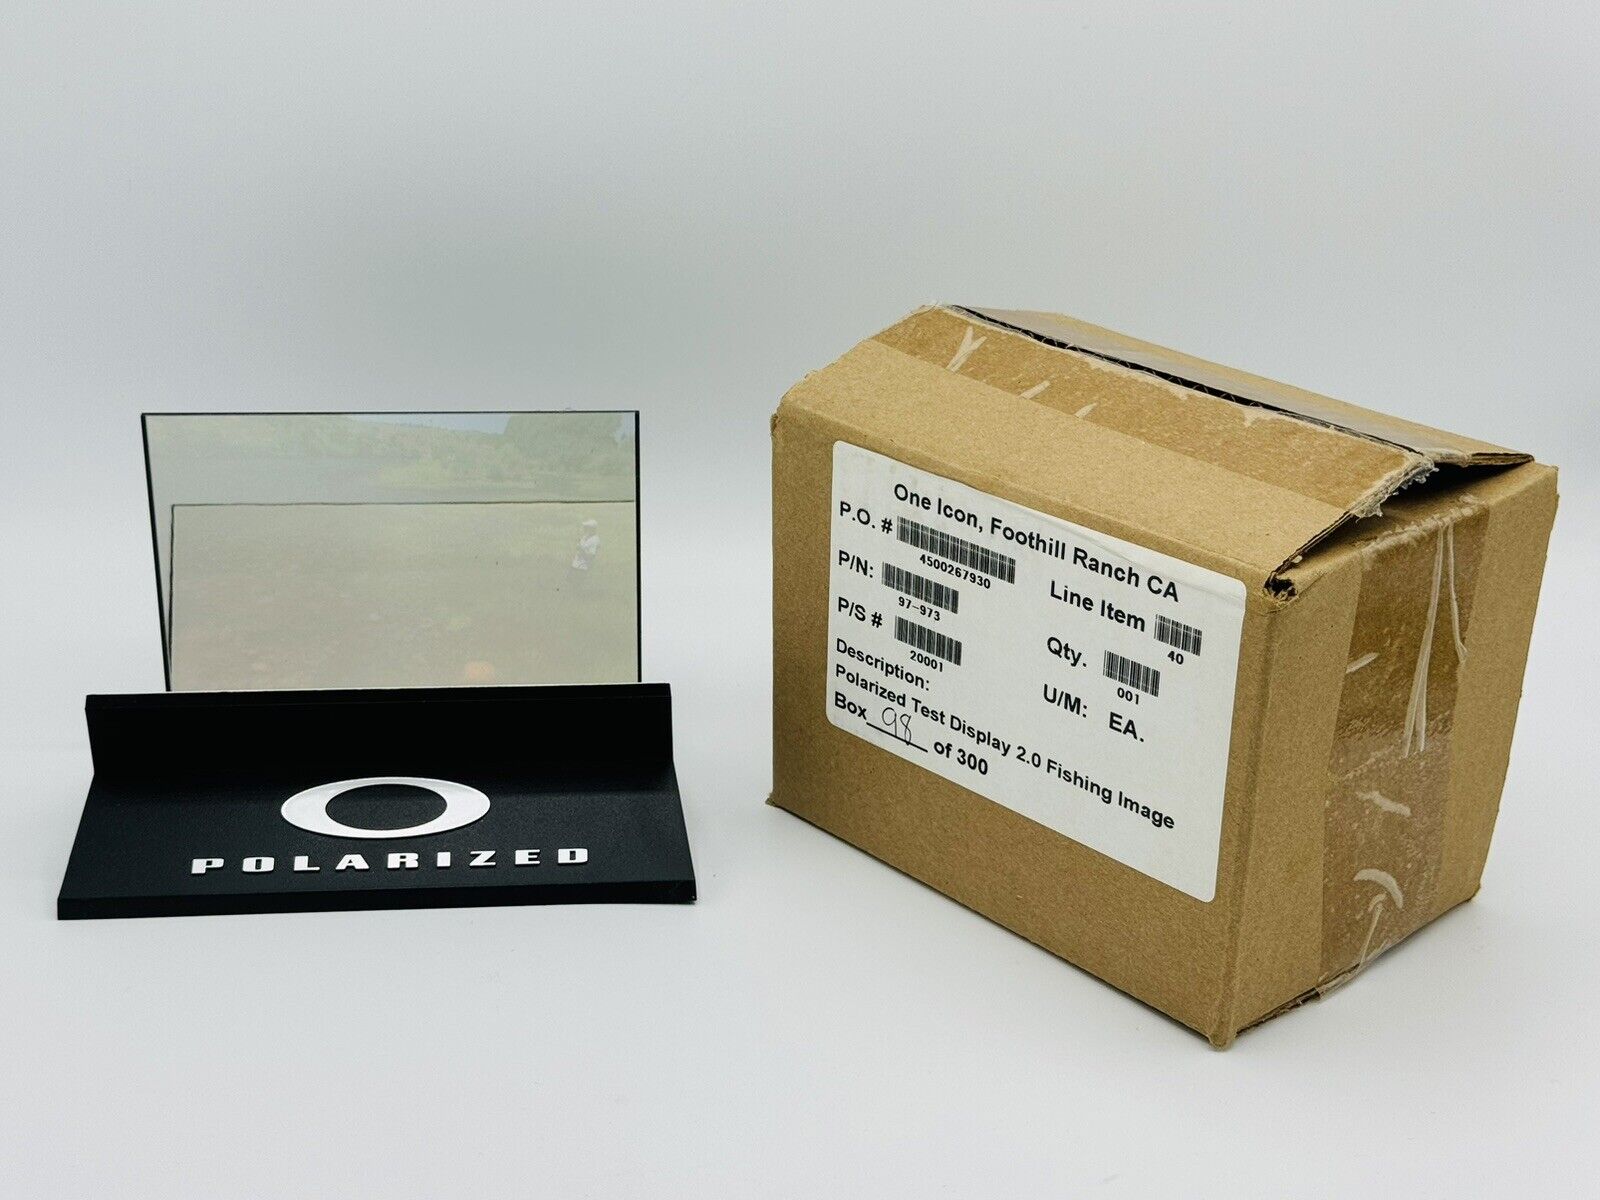 NEW OAKLEY POLARIZED TEST DISPLAY TEST 2.0 FISHING IMAGE STORE DISPLAY CASE RARE